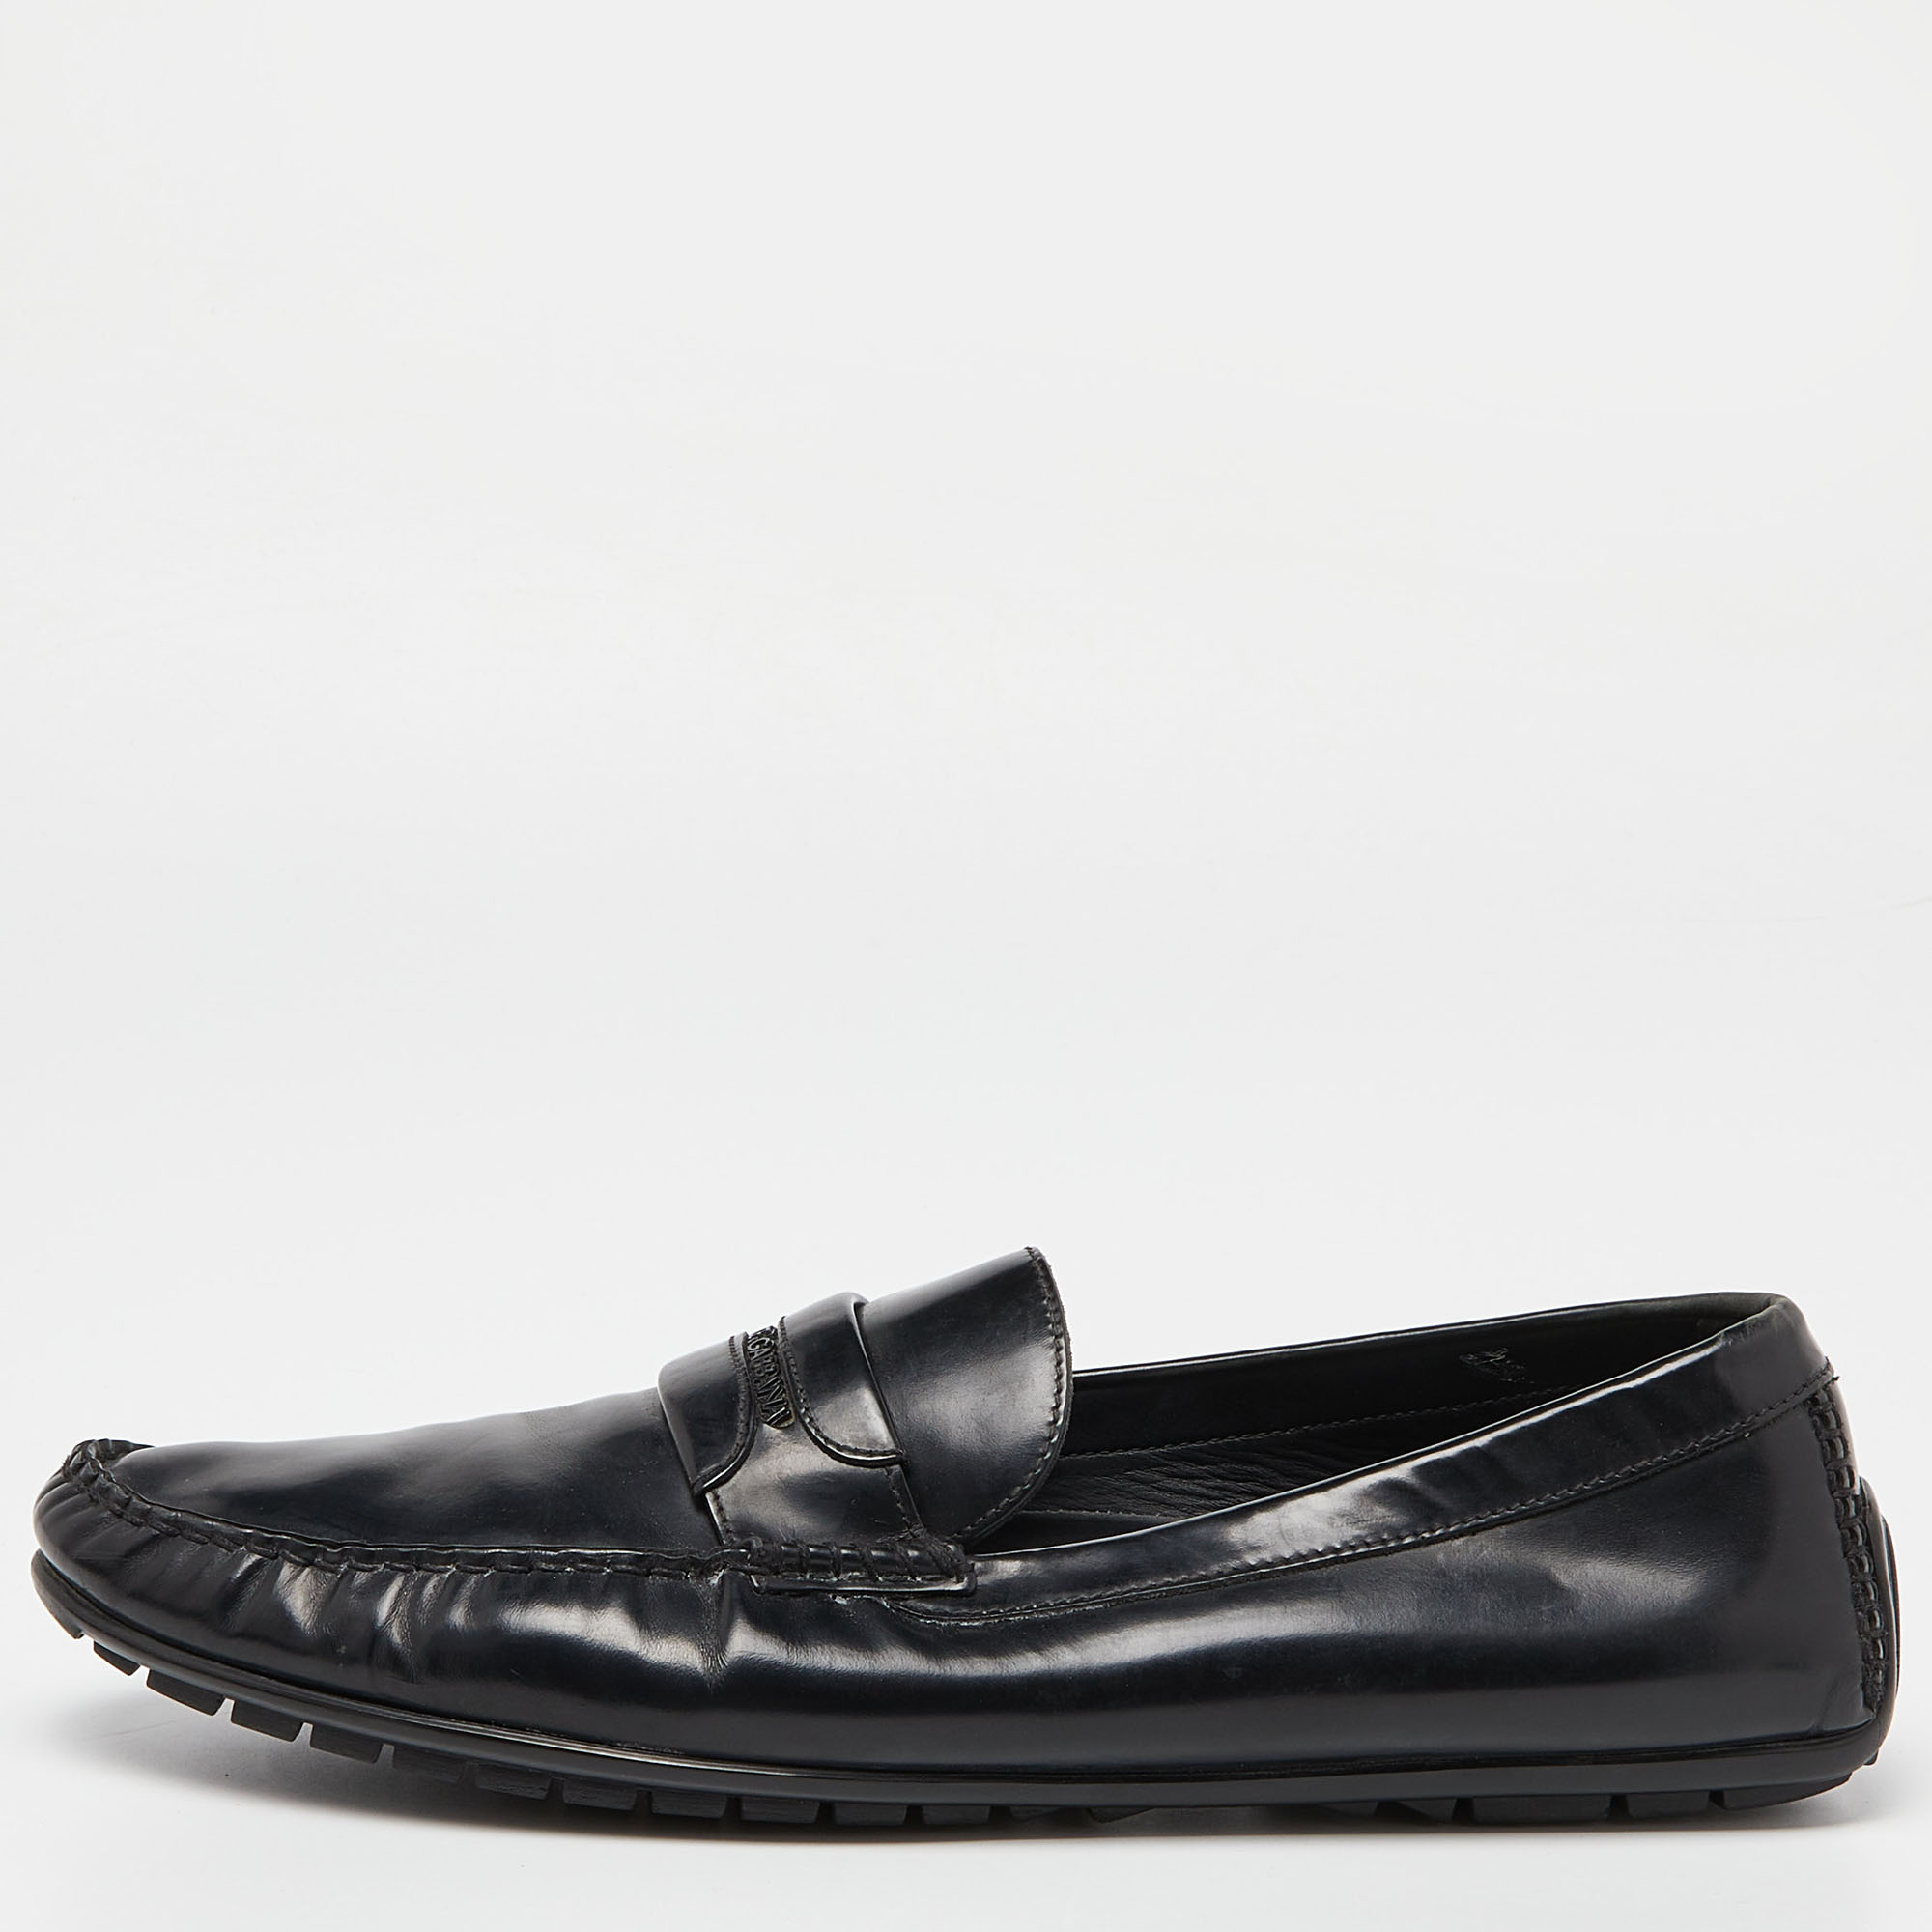 Pre-owned Dolce & Gabbana Black Leather Slip On Loafers Size 44.5